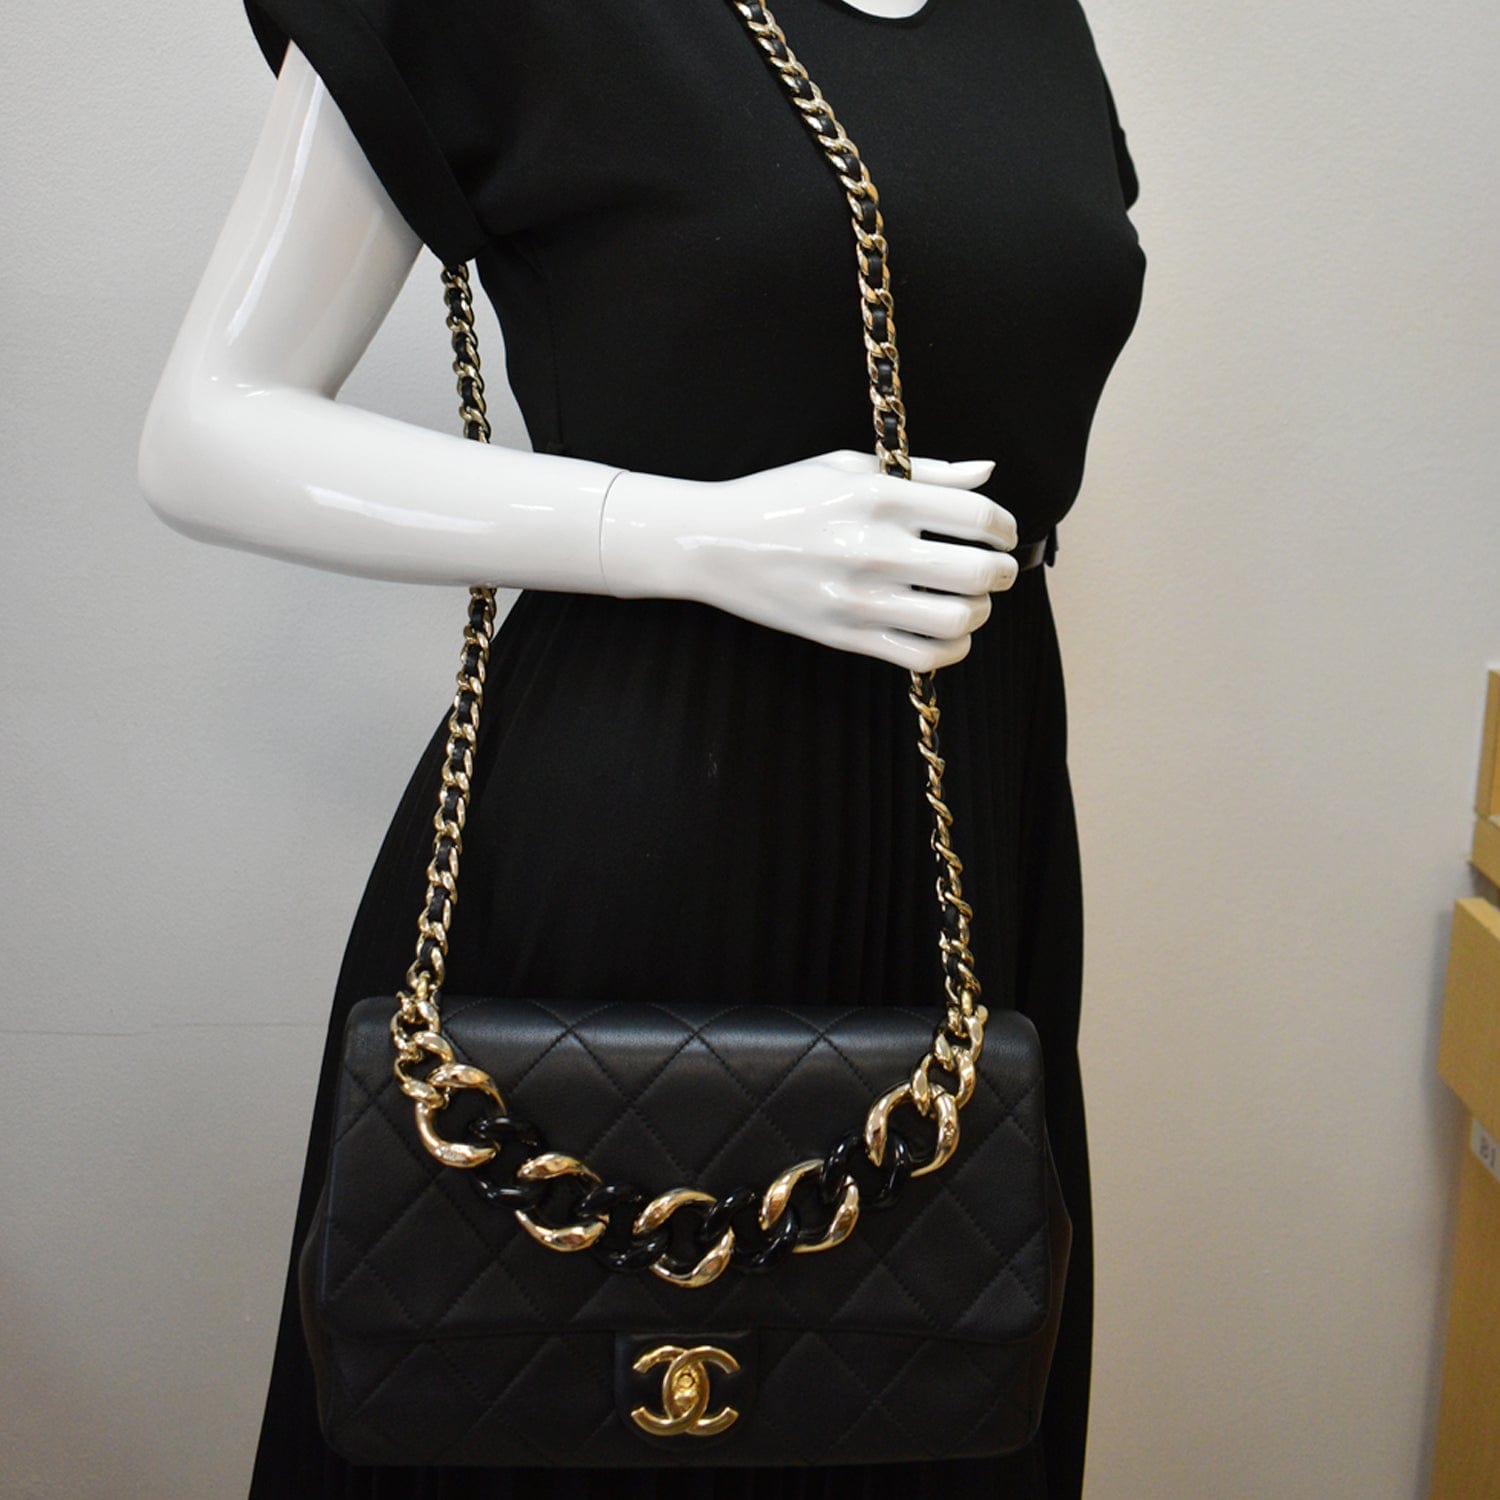 Buy Authentic Pre-Owned Designer Bags at Bolsa Boutique | Luxury Handbags  for Sale